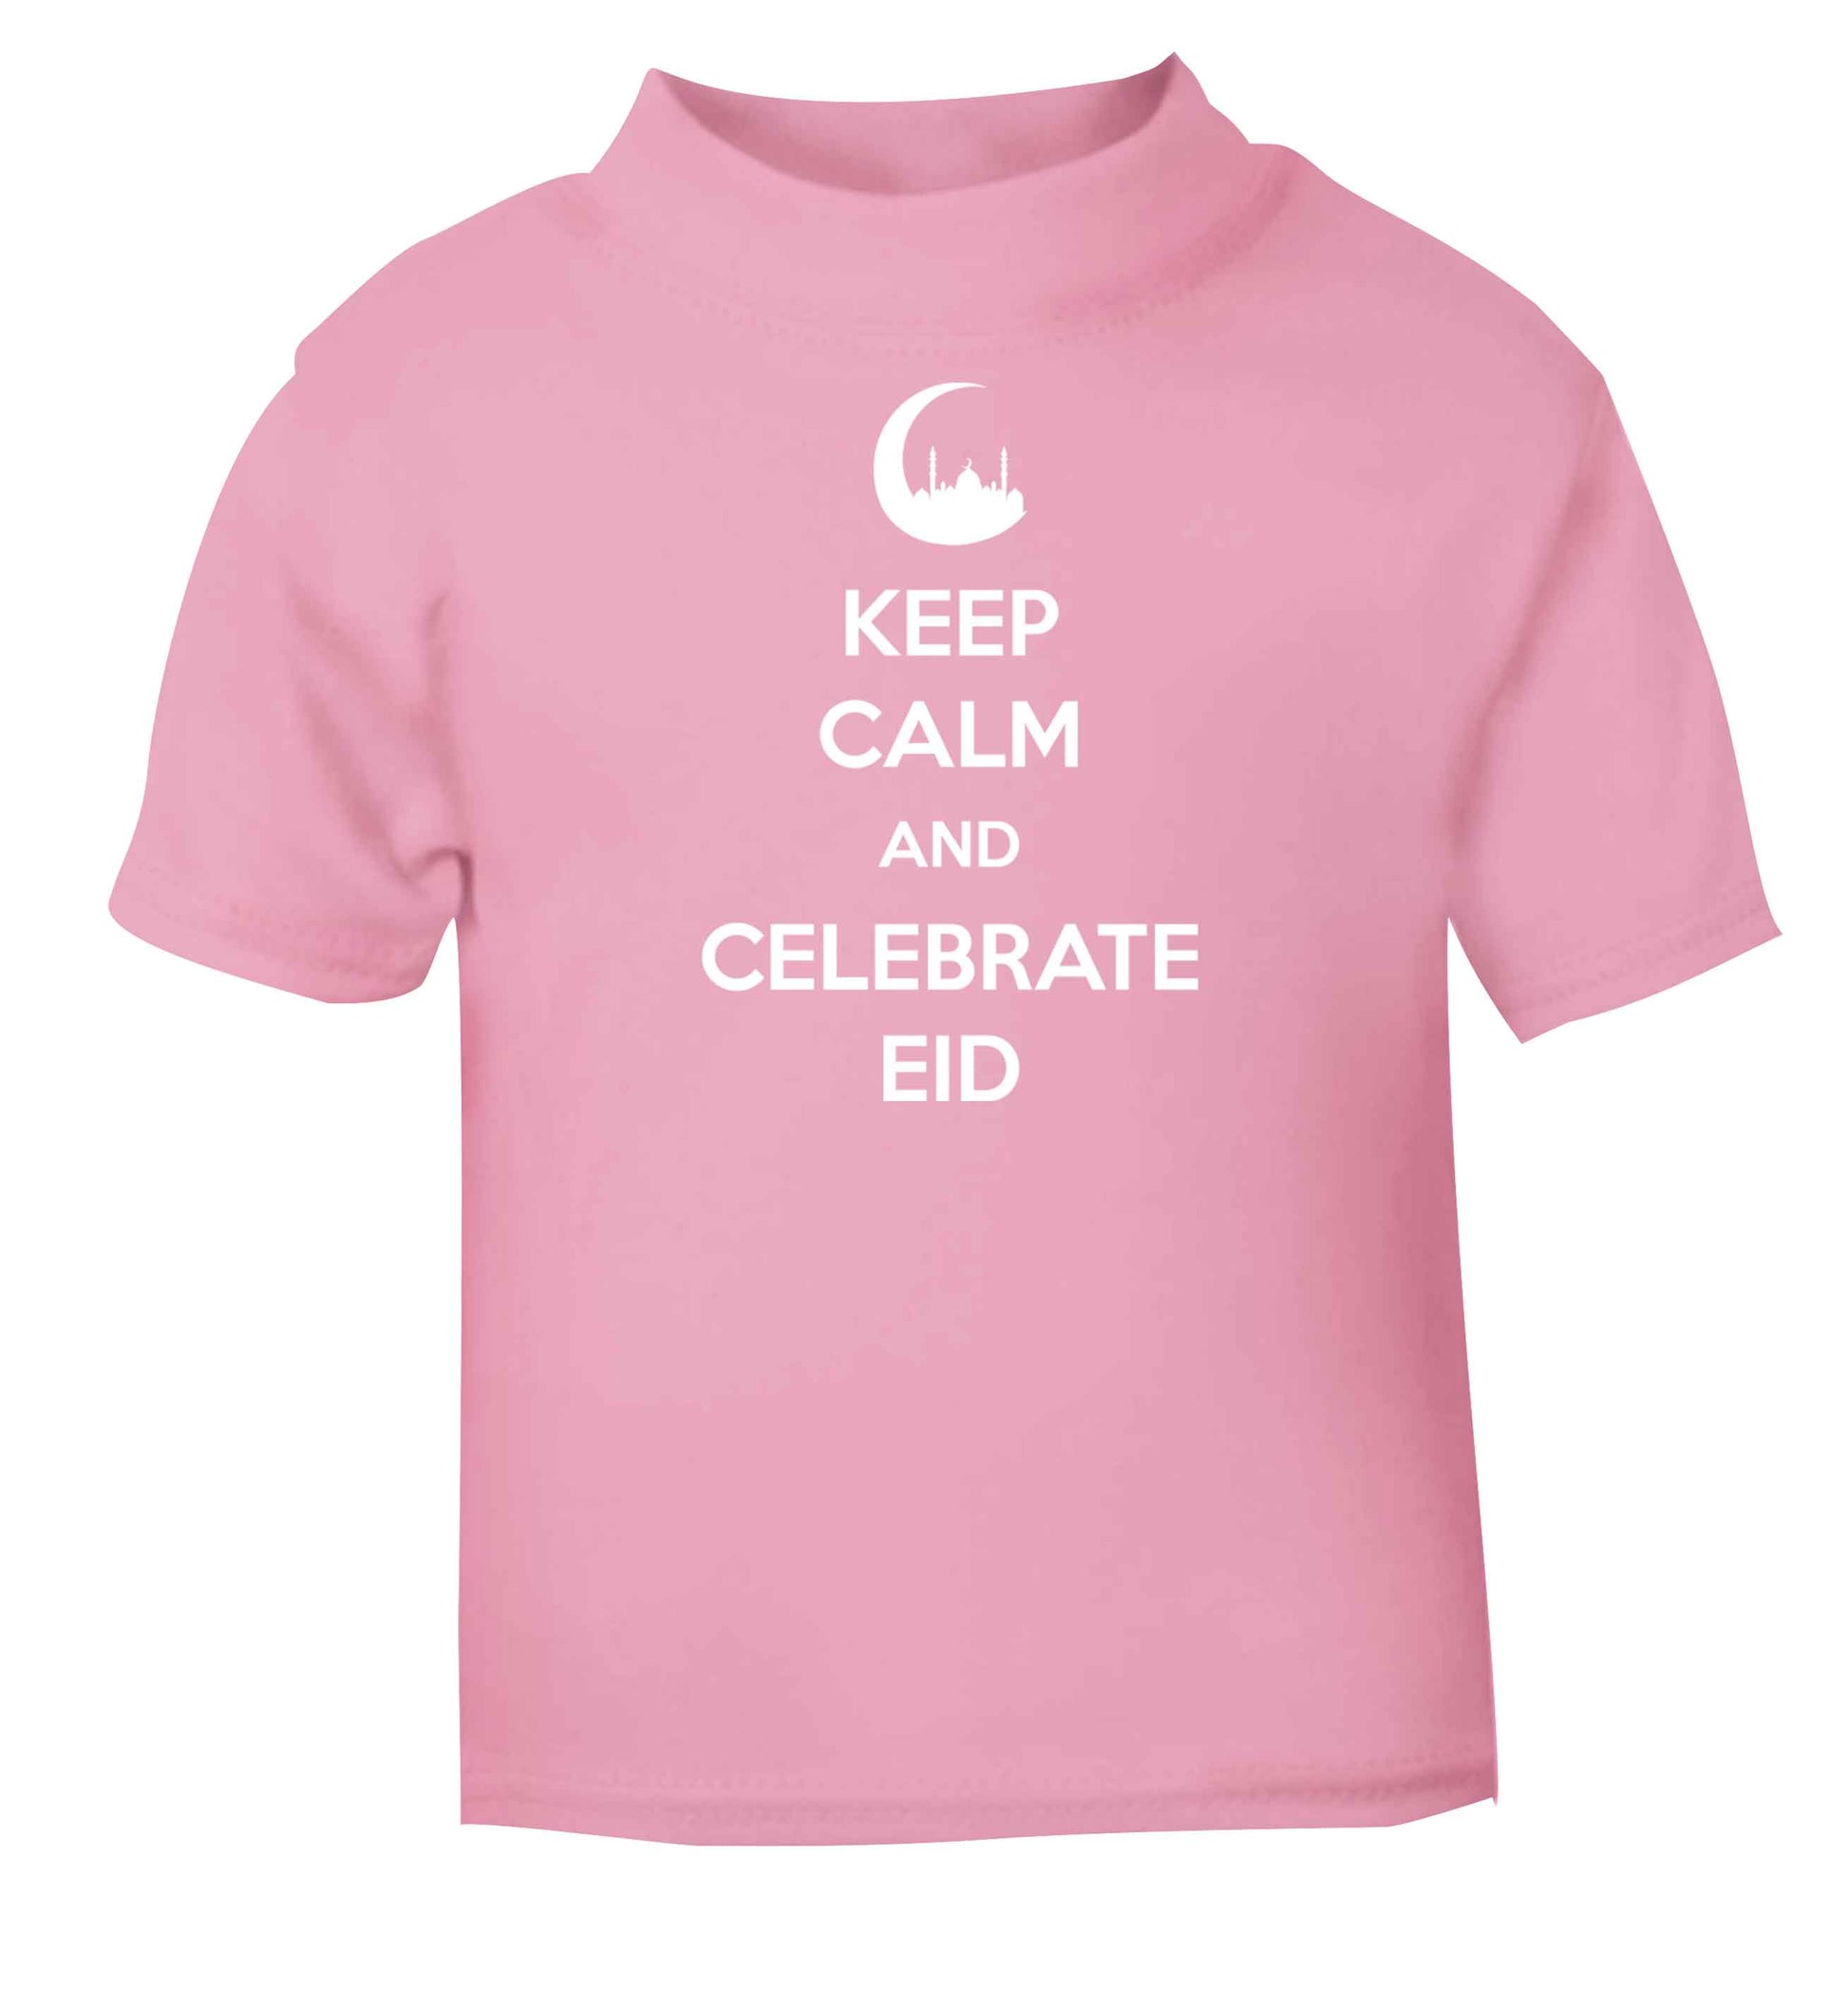 Keep calm and celebrate Eid light pink baby toddler Tshirt 2 Years